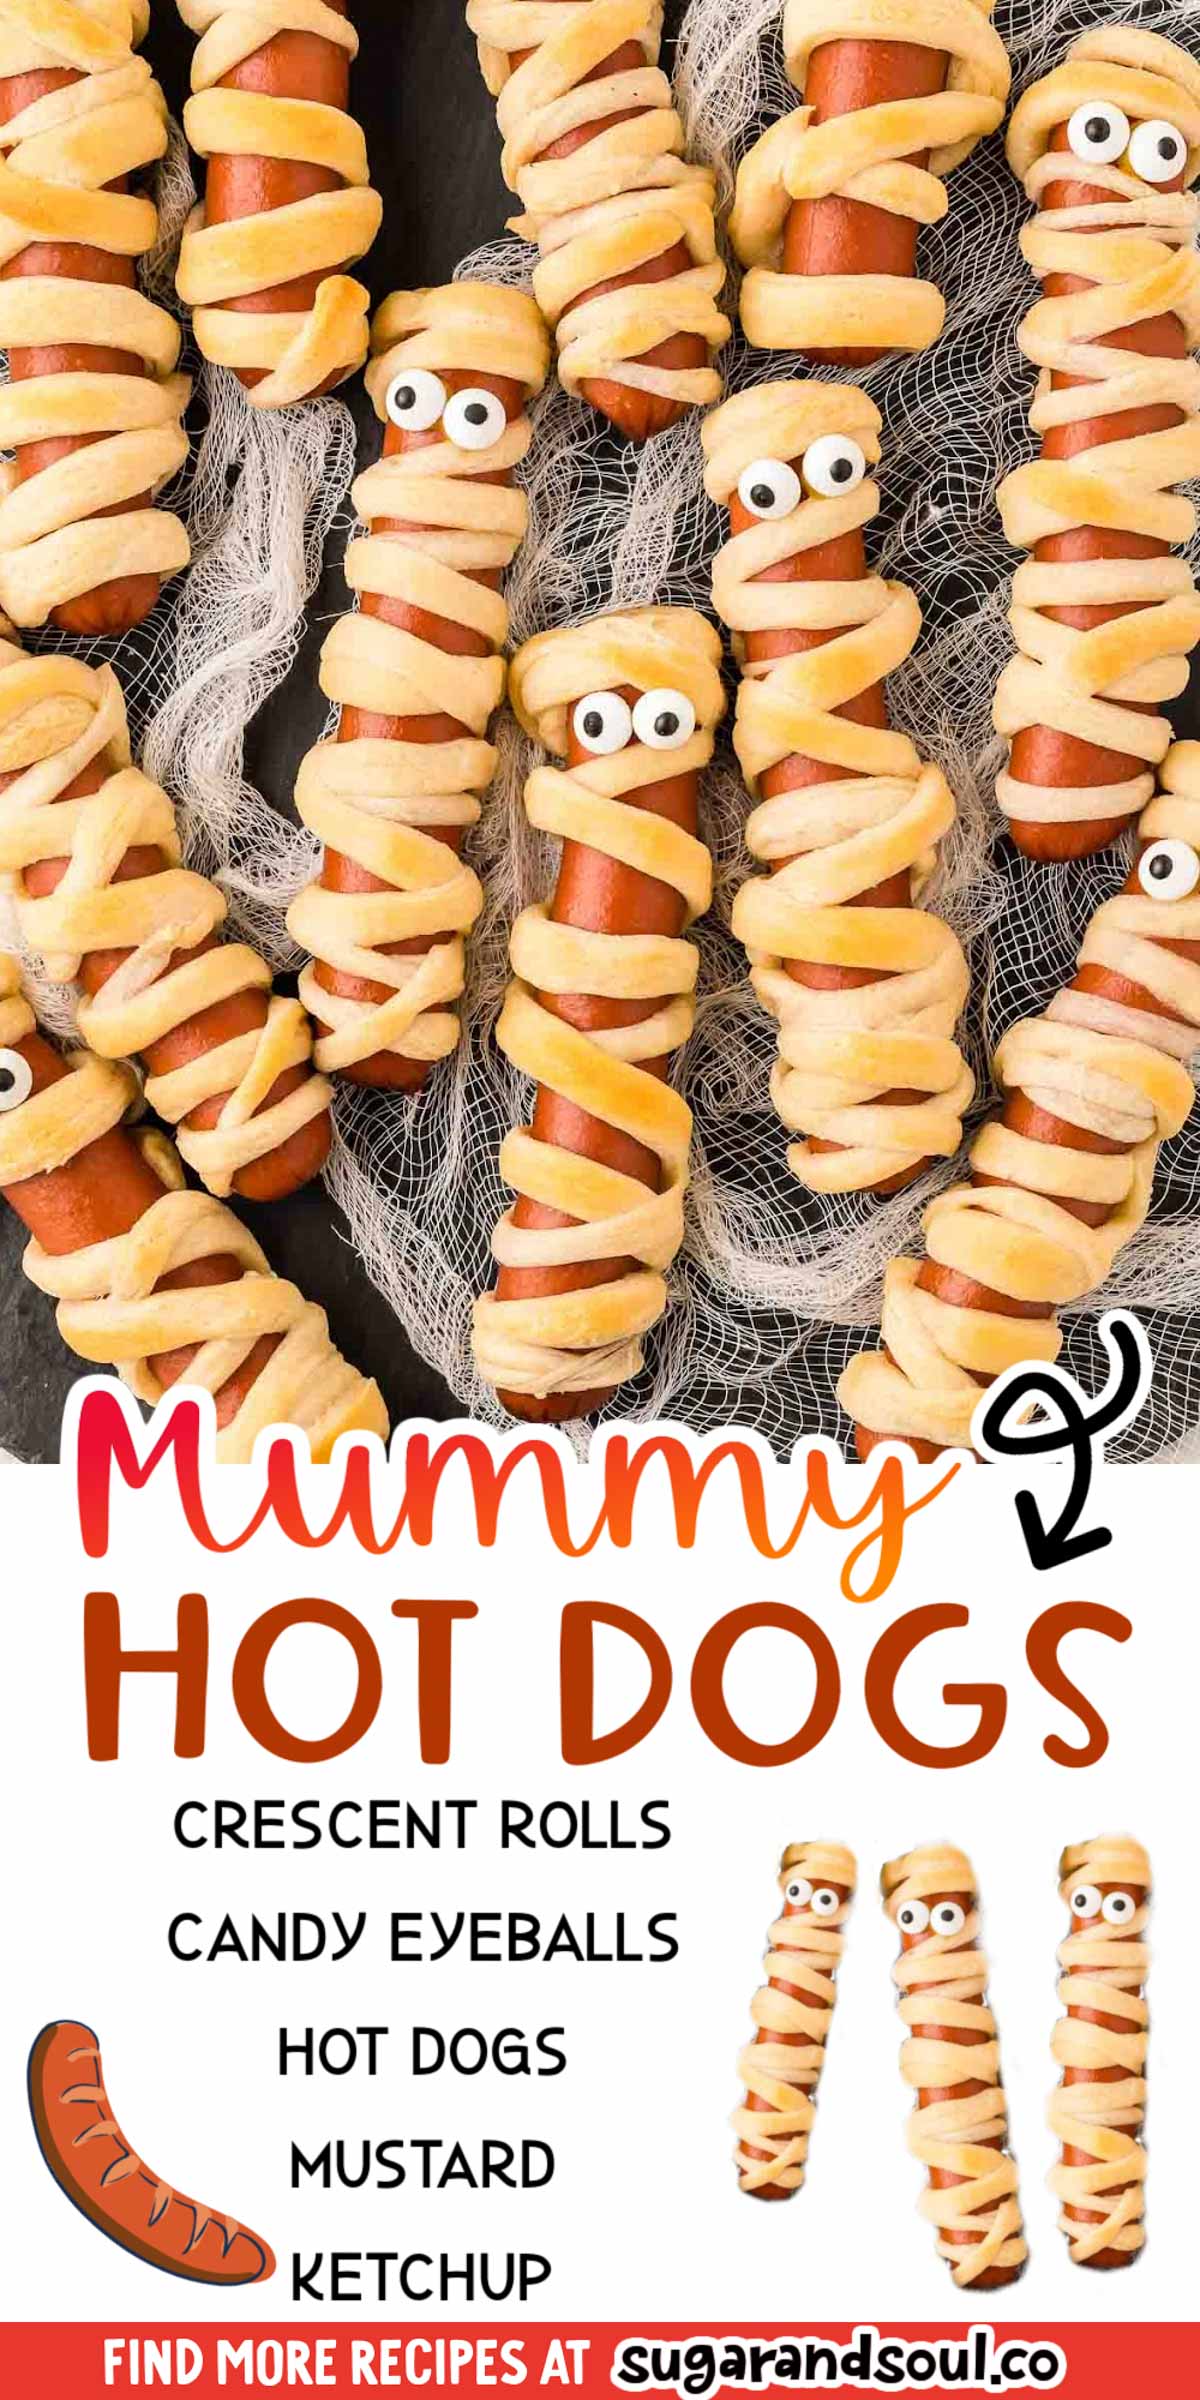 Mummy Hot Dogs are a fun Halloween twist on the classic childhood pigs in a blanket, the perfect appetizer or meal to celebrate October 31st! A batch bakes up in just under 25 minutes! via @sugarandsoulco